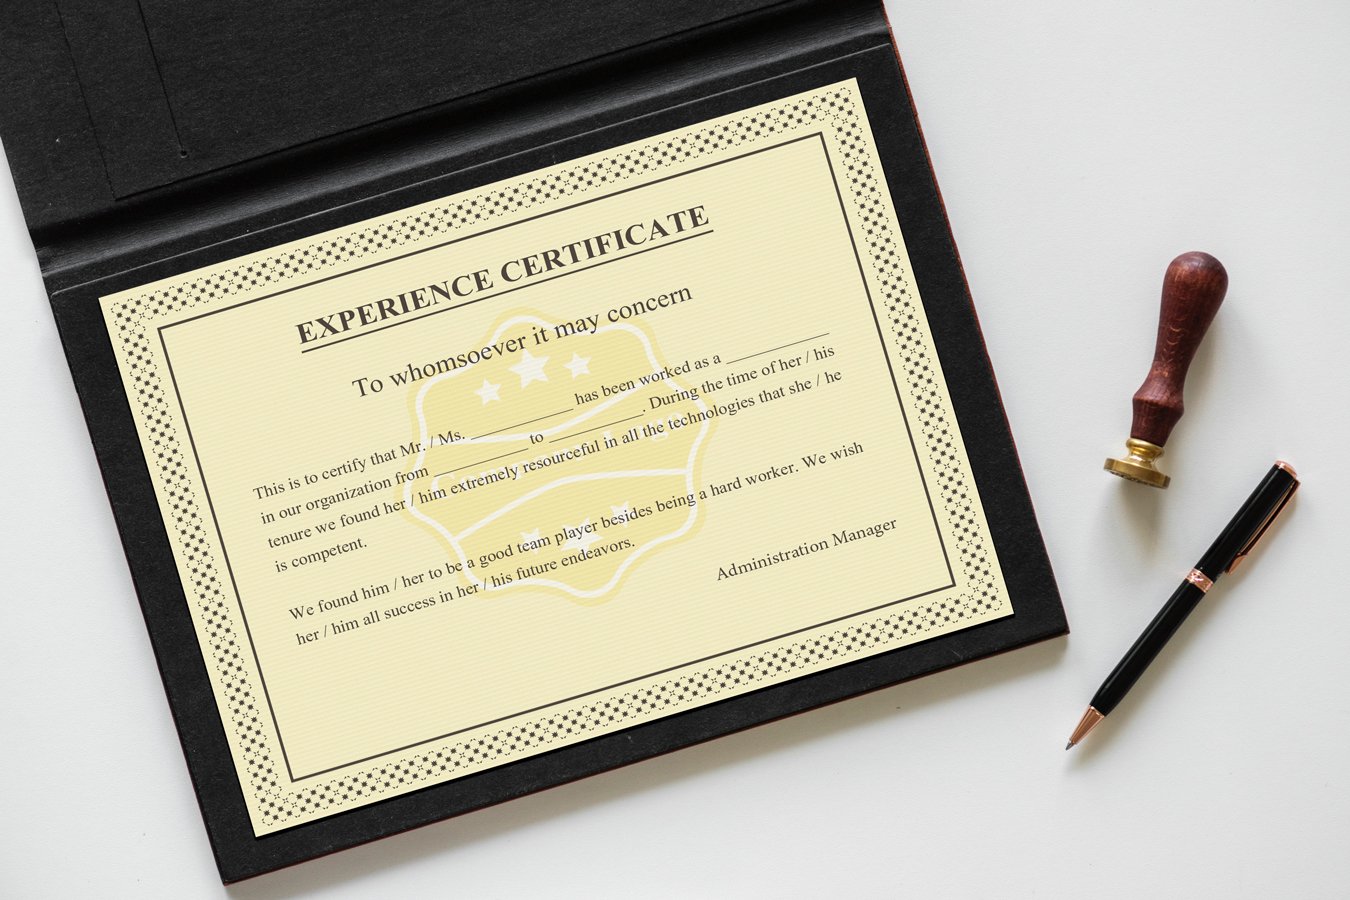 Certificate of Experience Template cover image.